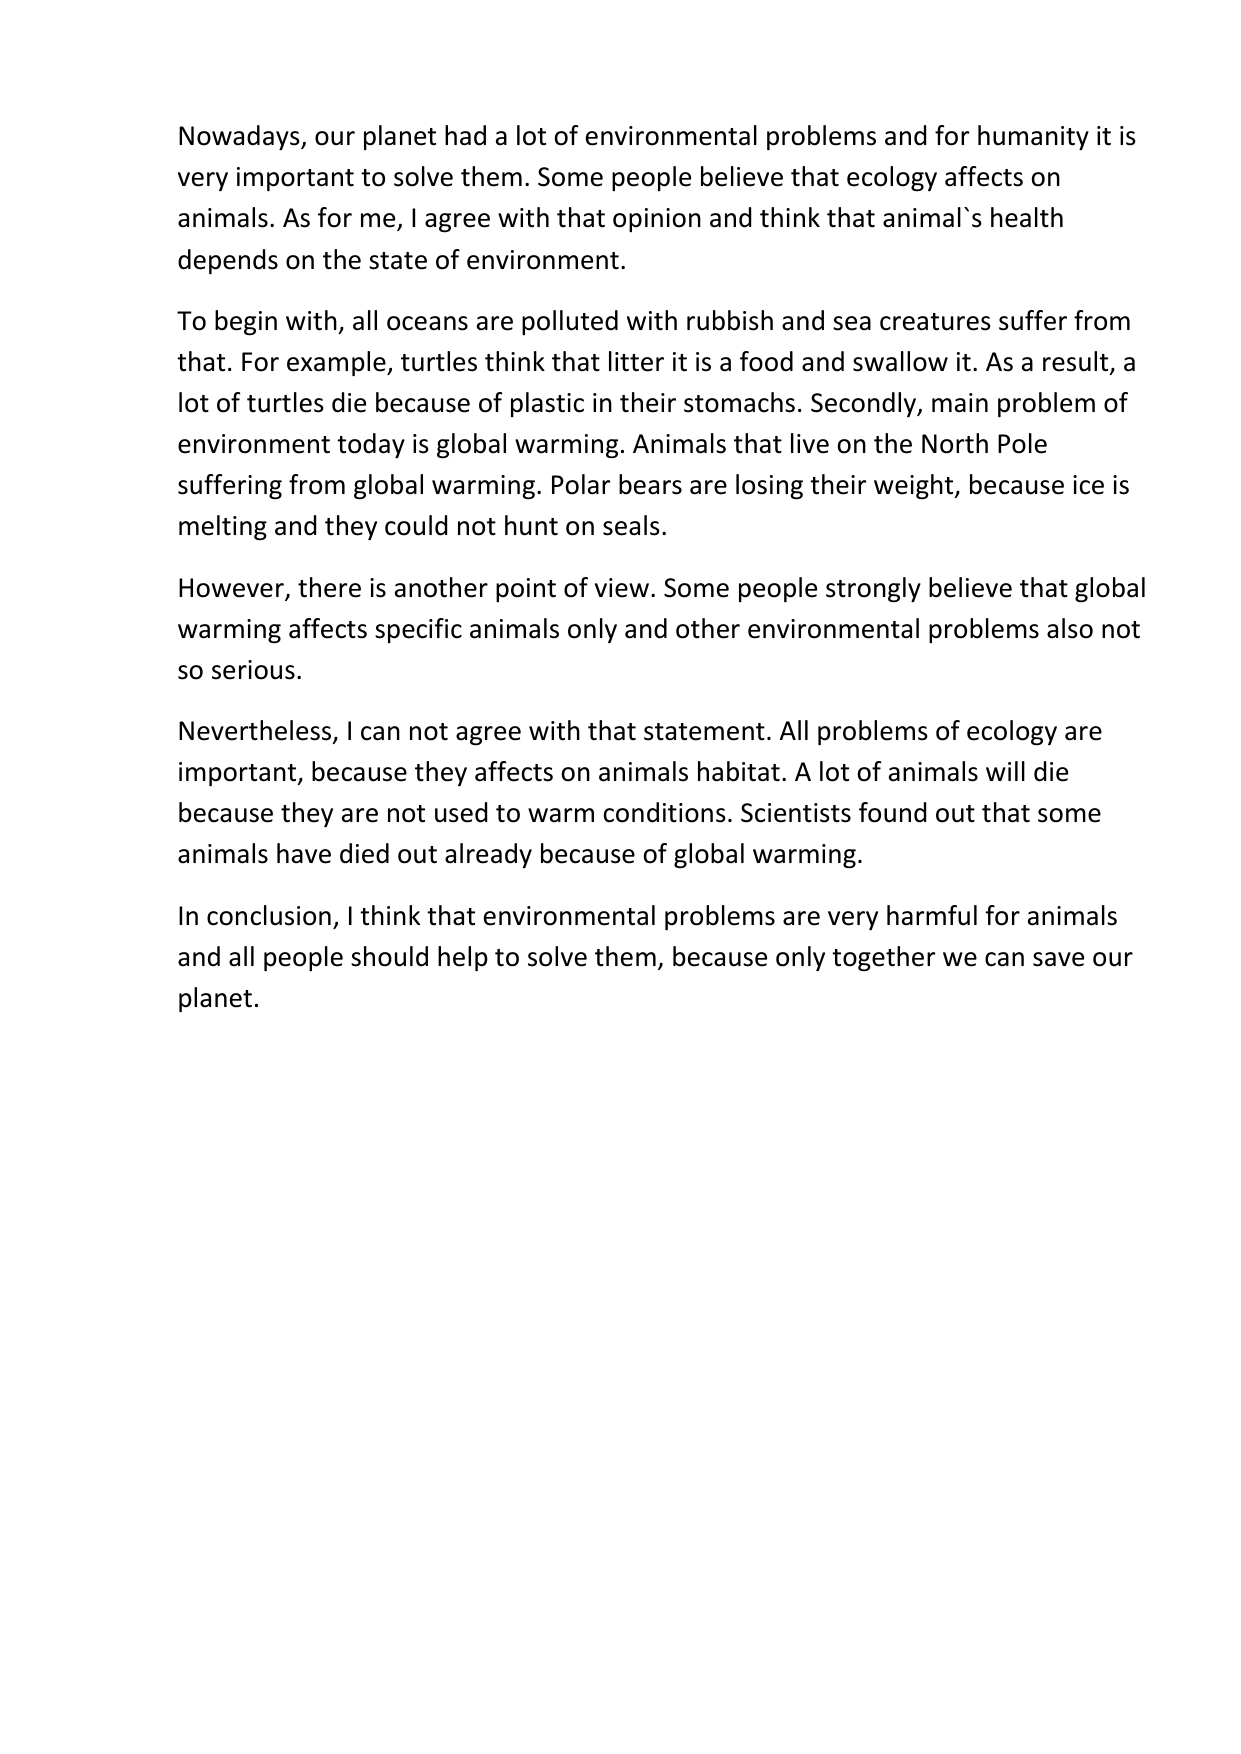 essay about ecology problems